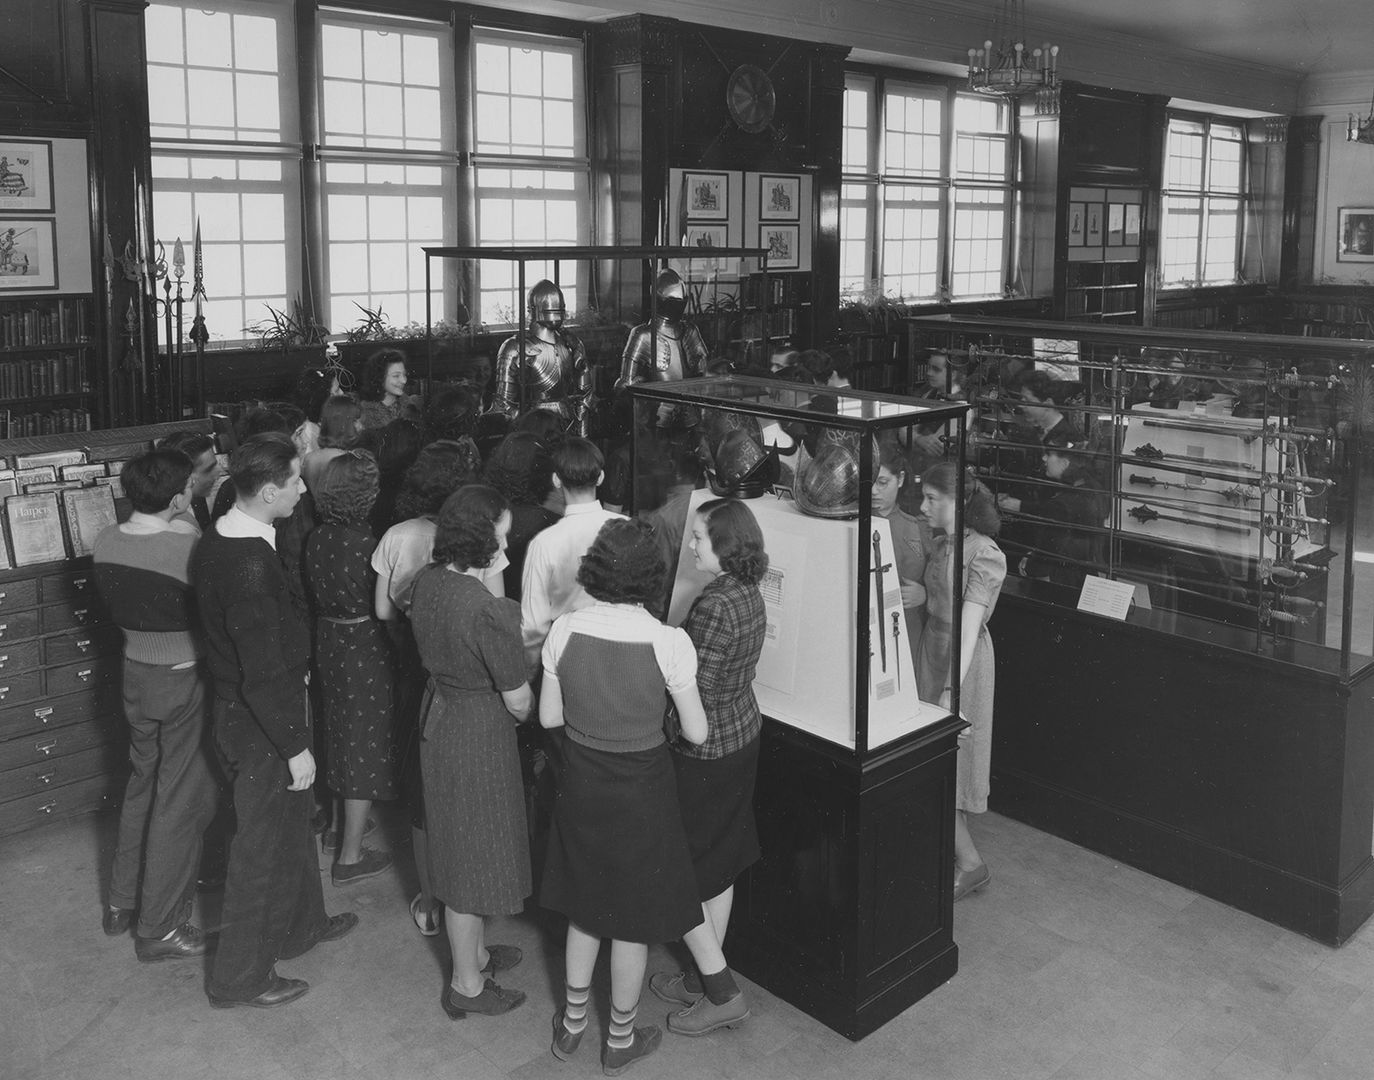 Group of students from The Bronx looking at Arms and Armor at The Met in the 1930s.